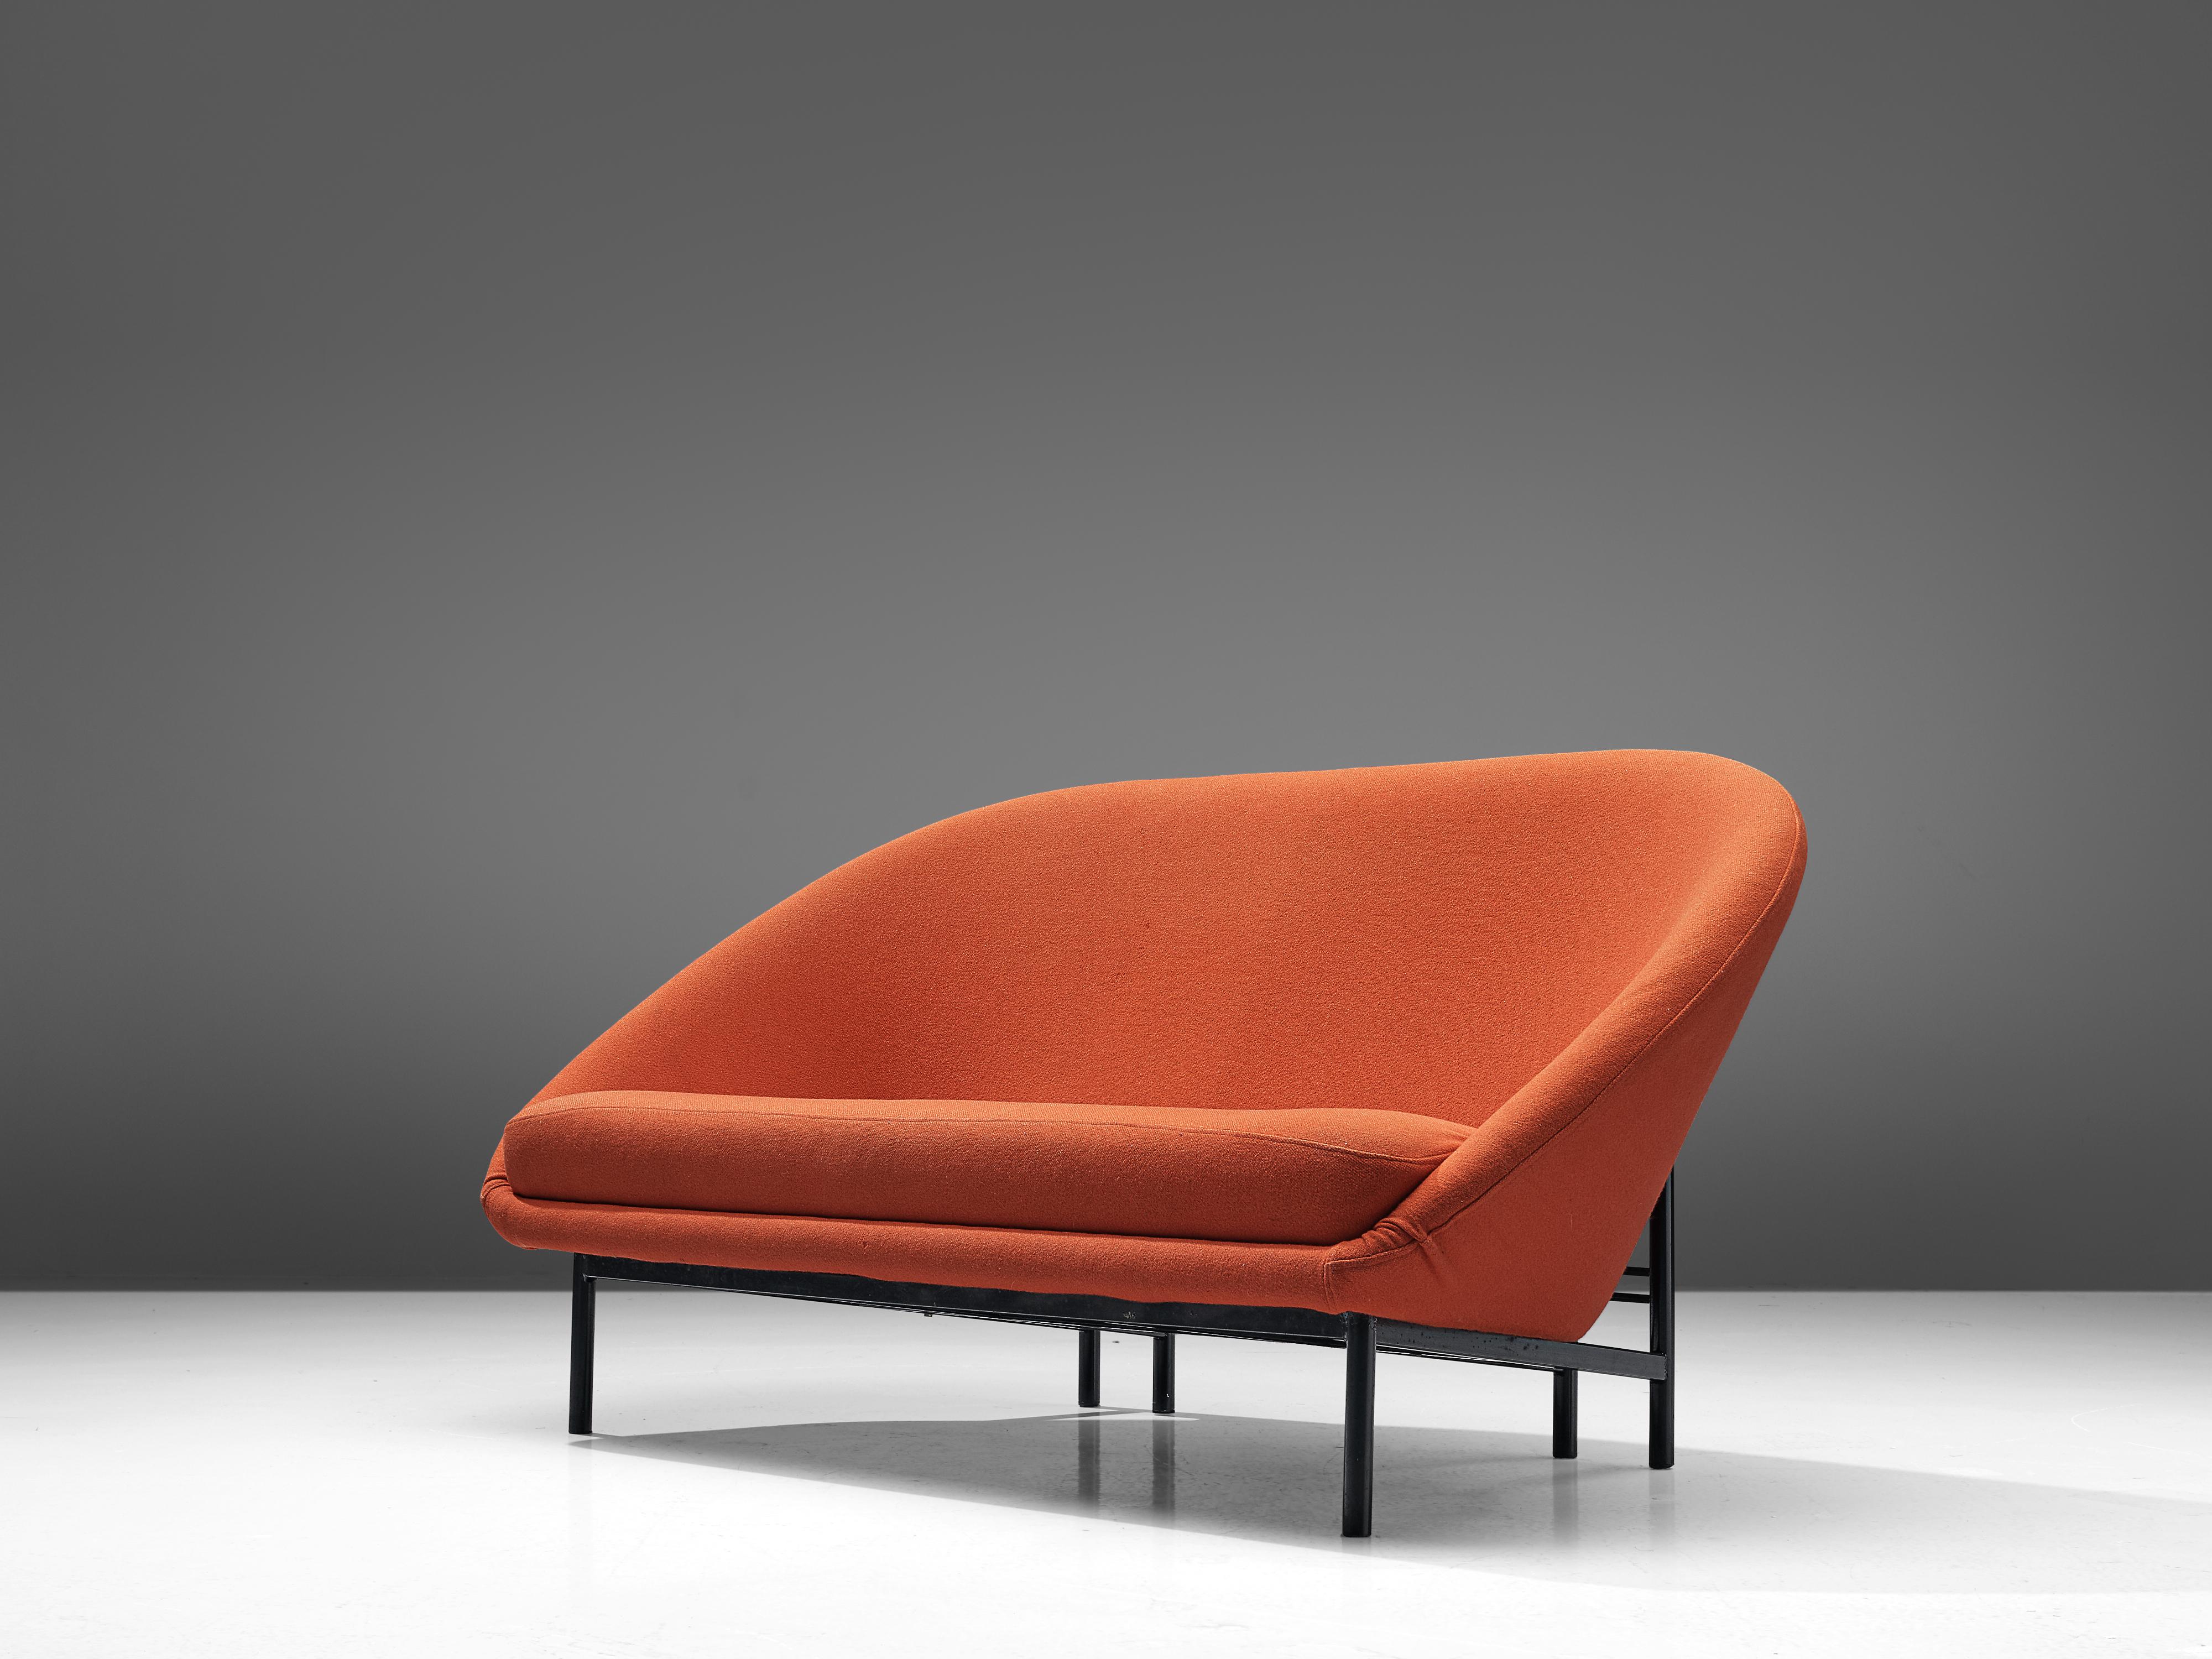 Theo Ruth for Artifort, sofa, fabric, lacquered steel, The Netherlands, 1970.

A Dutch two-seat sofa in orange red colored fabric by Theo Ruth. The back tilts slightly backwards and has the recognizable natural flow and feel of Ruth's design. The